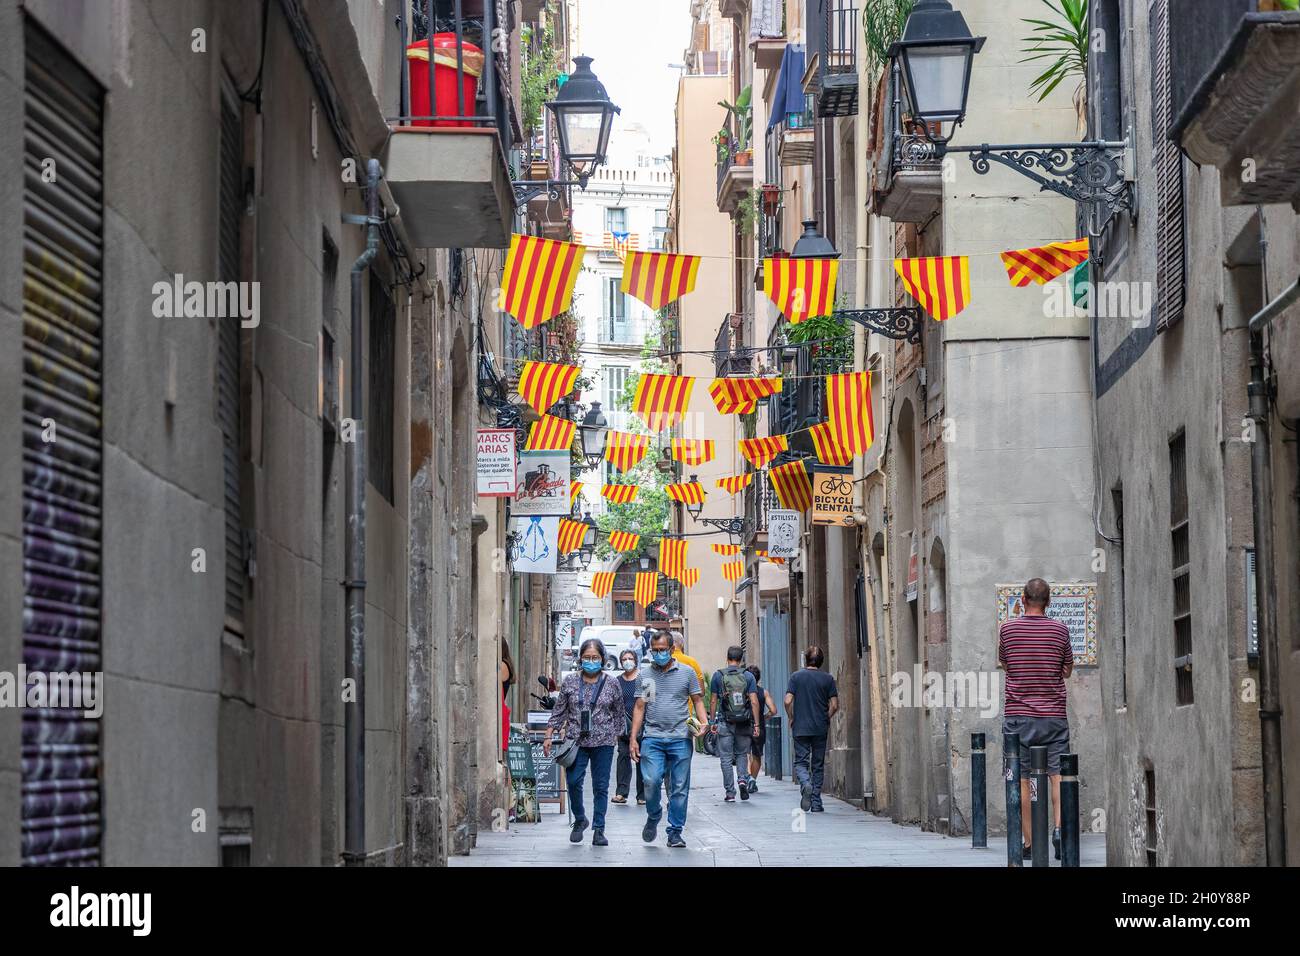 Barcelona, Spain - September 27, 2021: Barcelona street decorated with flags of Catalonia Stock Photo